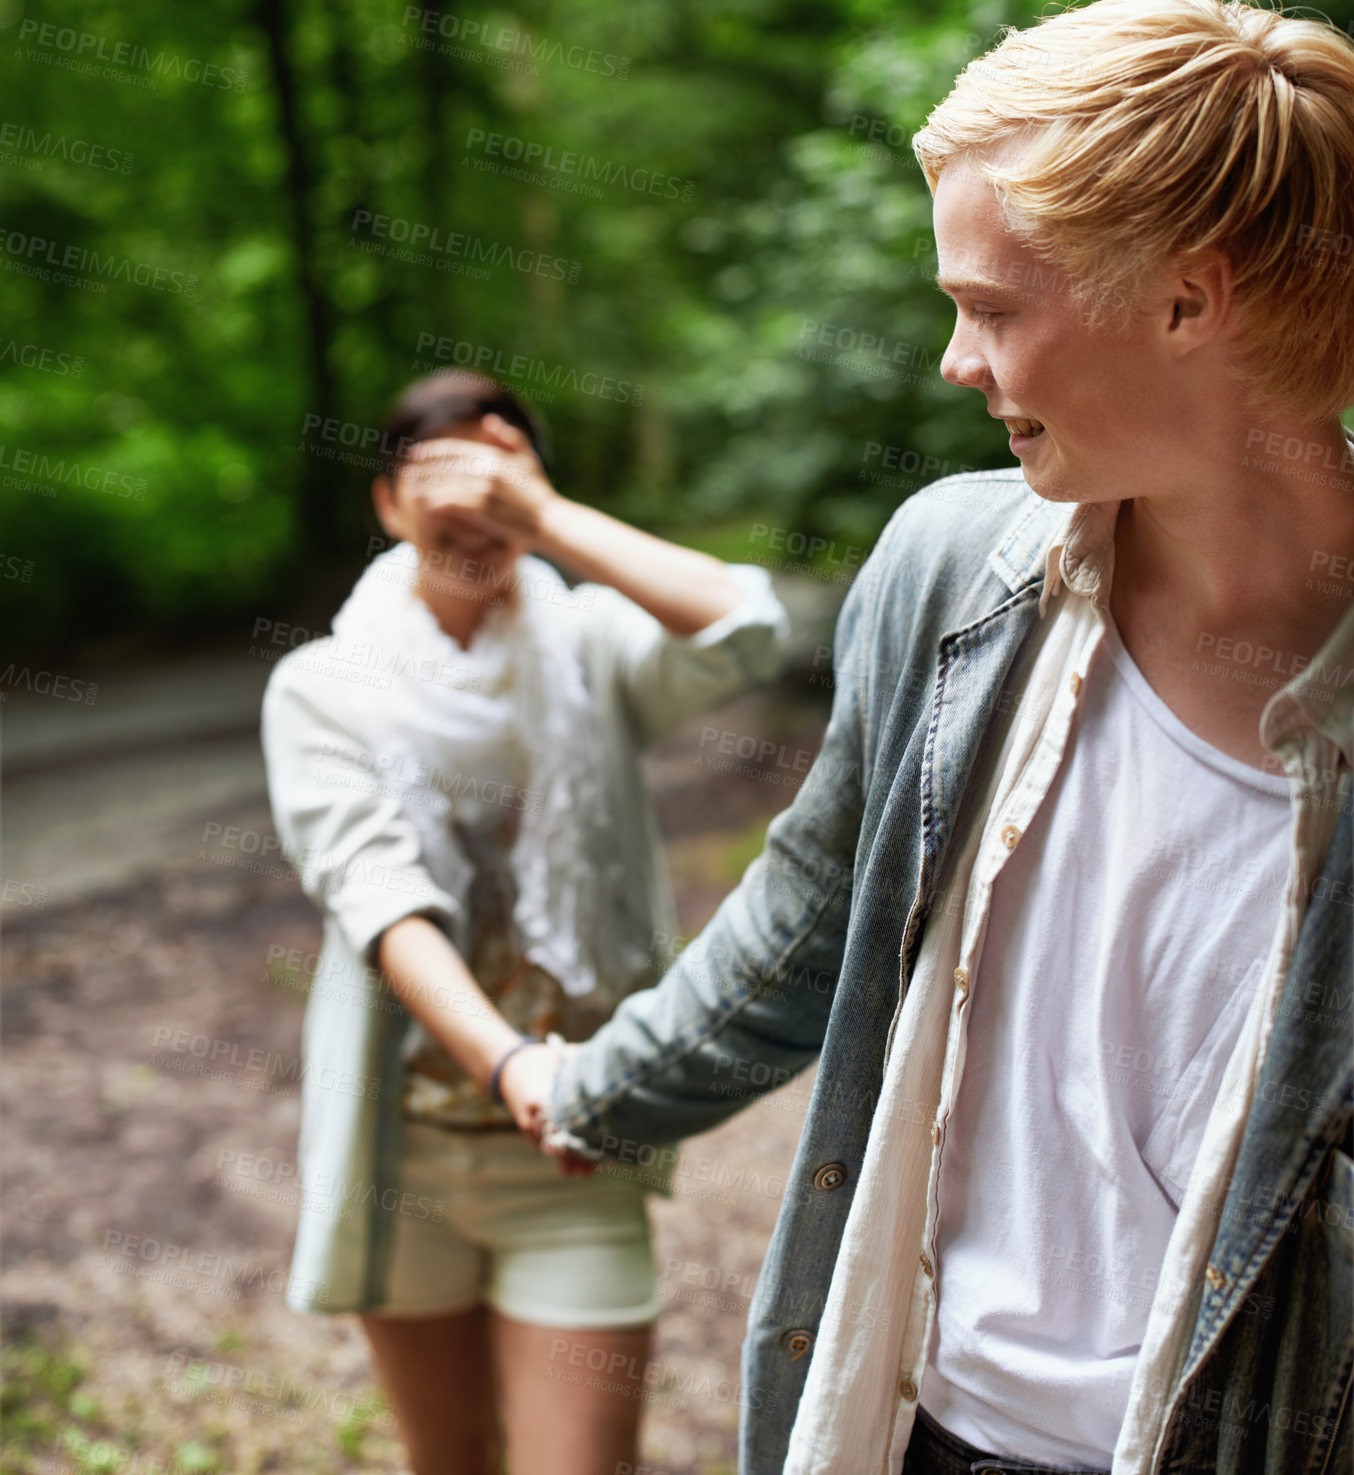 Buy stock photo A girl covering her eyes with her hand is led through the forest by her boyfriend